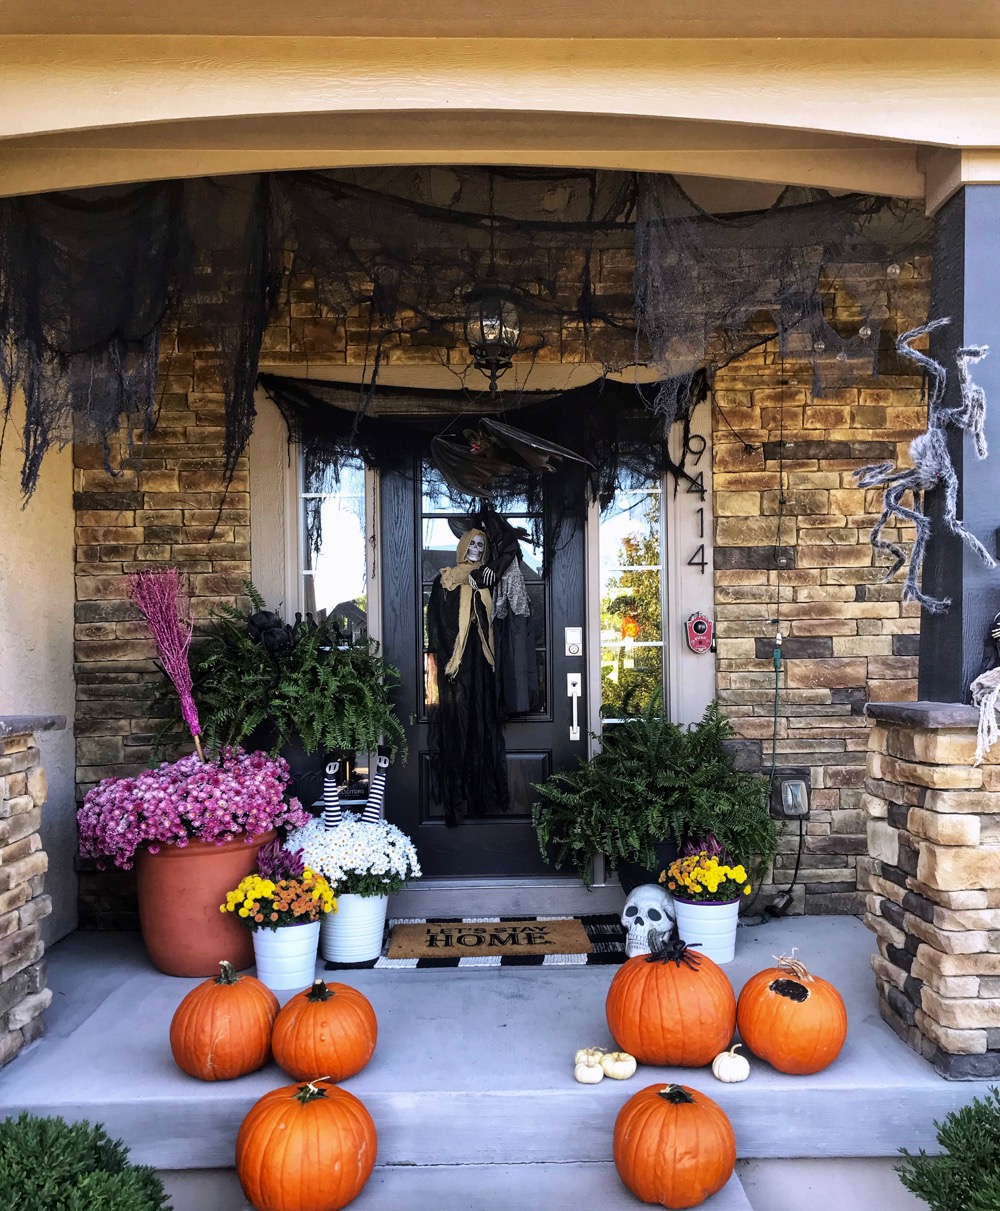 How to Decorate a Halloween Front Porch - Life Love Larson